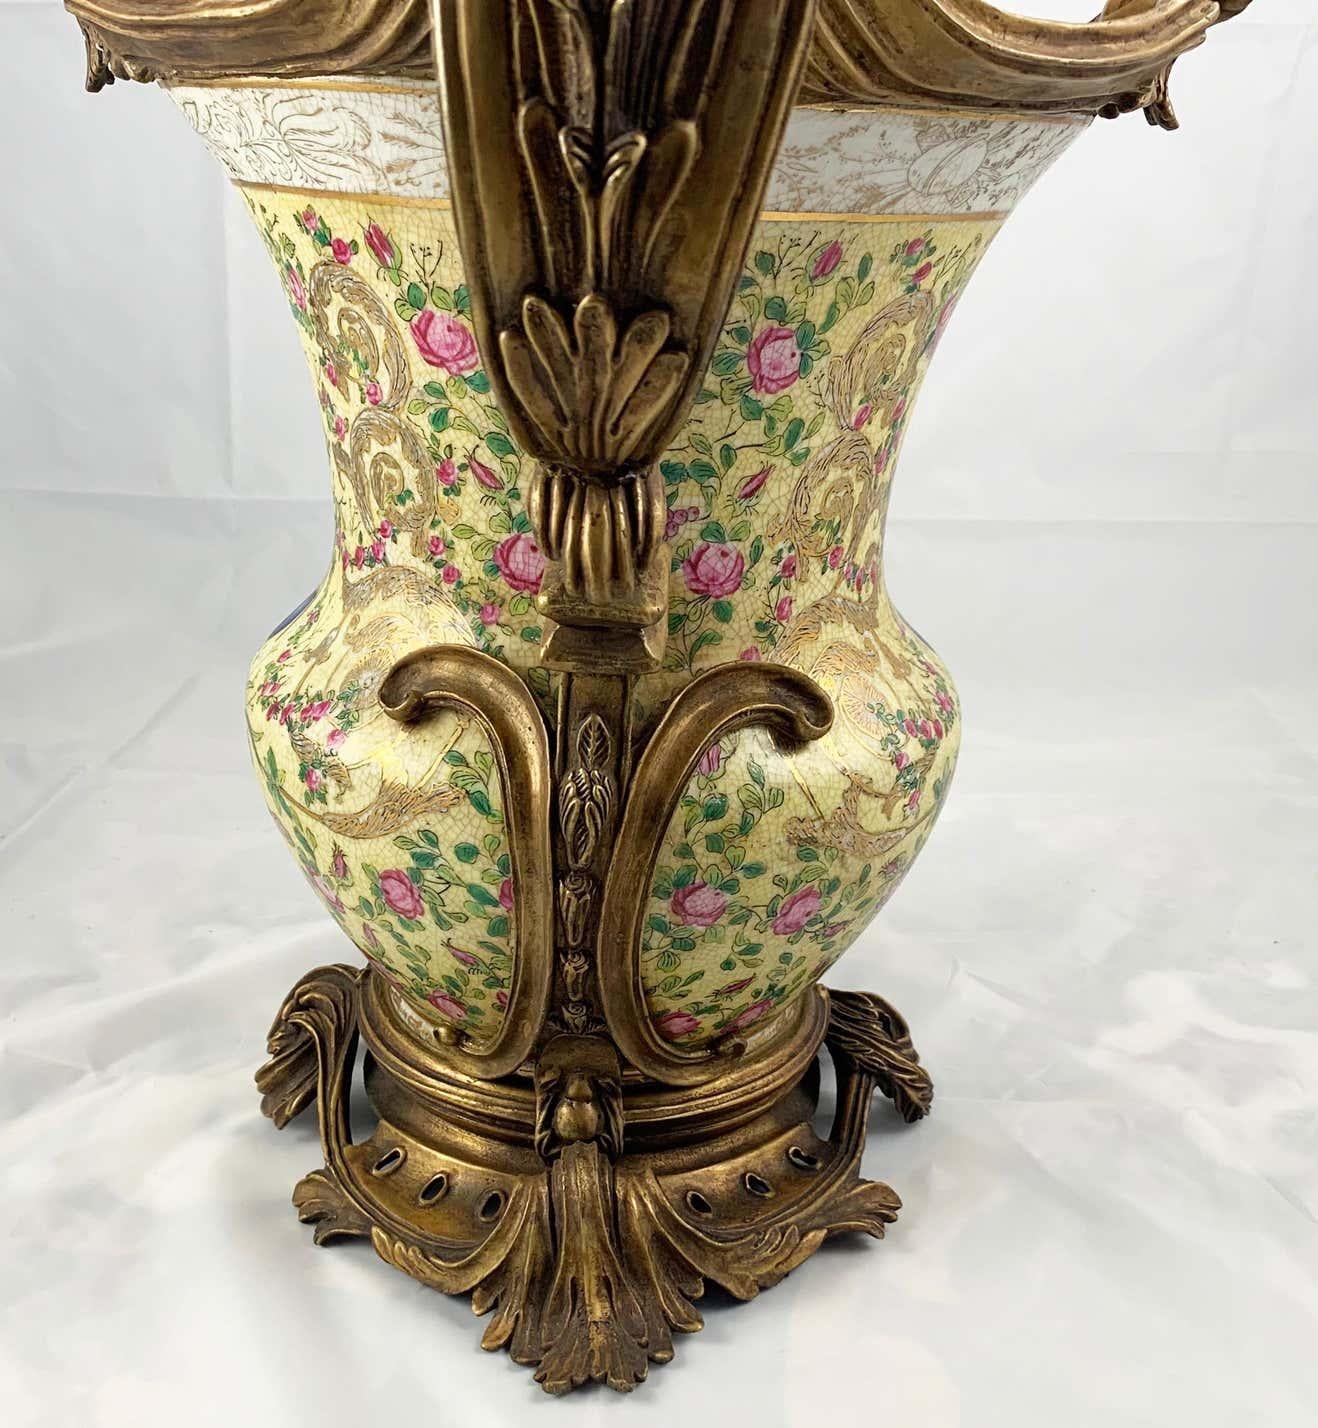 20th Century Pair of French Porcelain and Ormolu-Mounted Twin Handled Urns For Sale 7